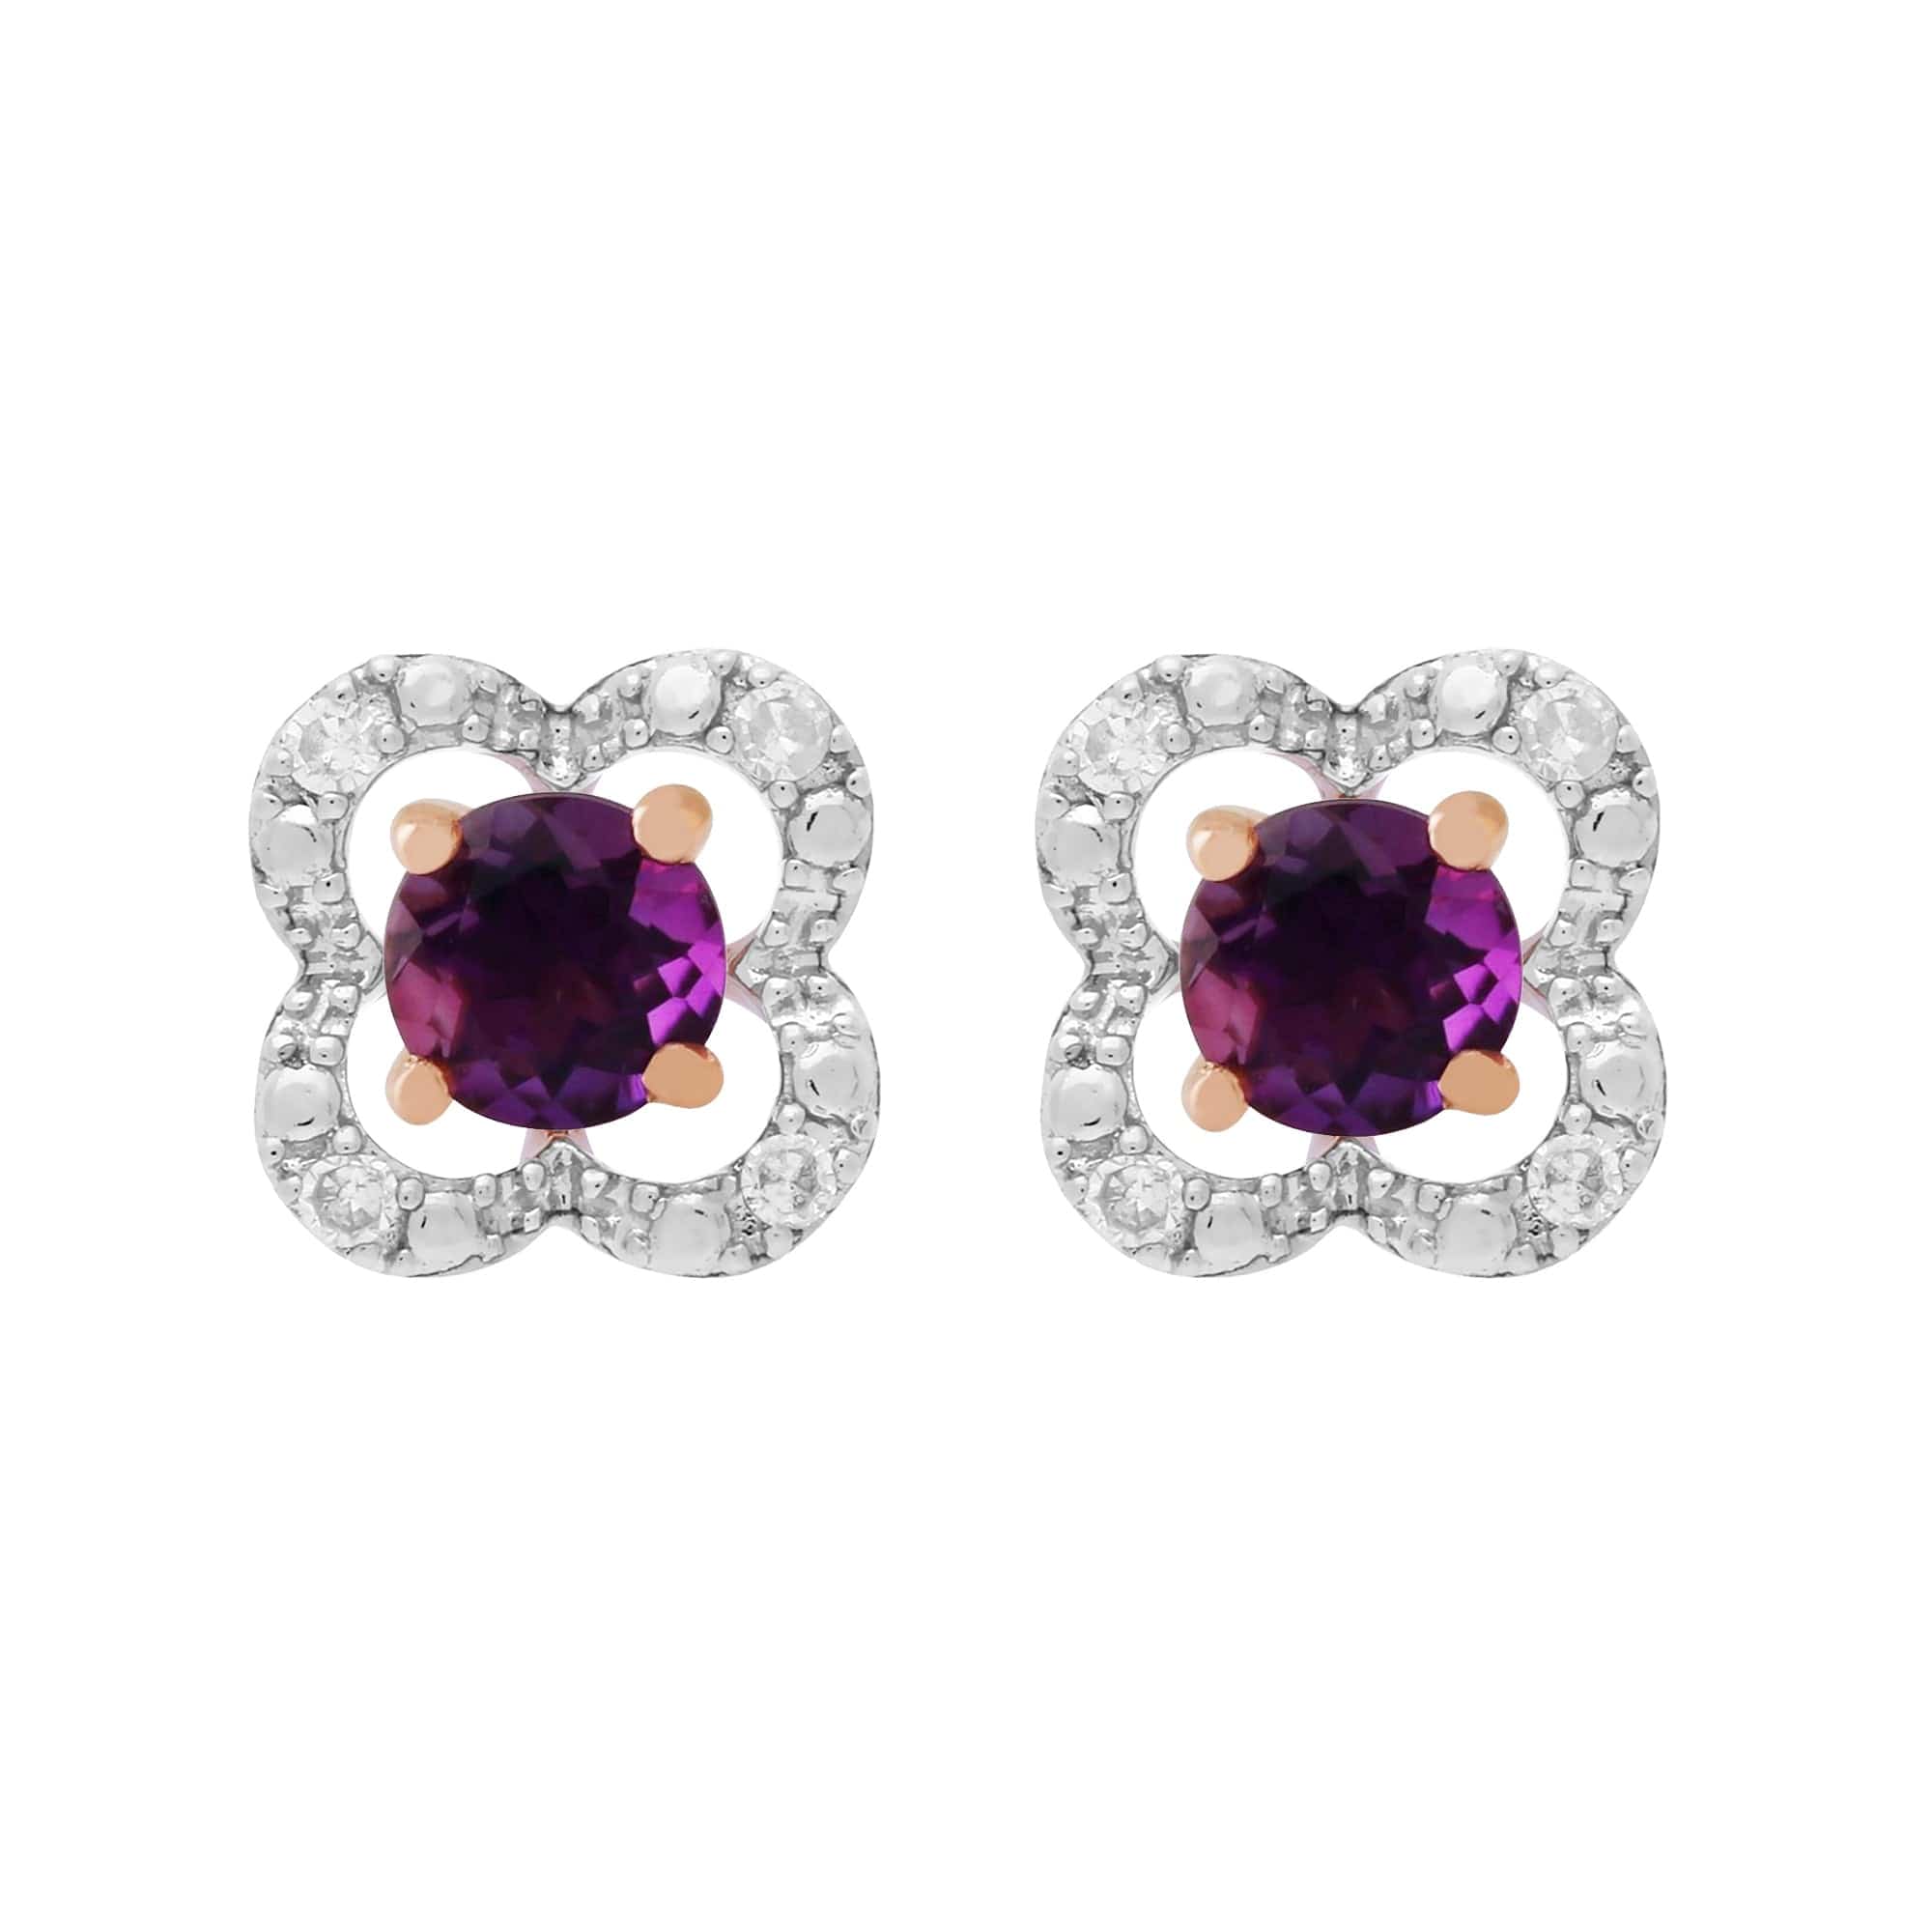 183E4316059-191E0373019 Classic Round Amethyst Stud Earrings with Detachable Diamond Flower Jacket in 9ct Rose Gold 1